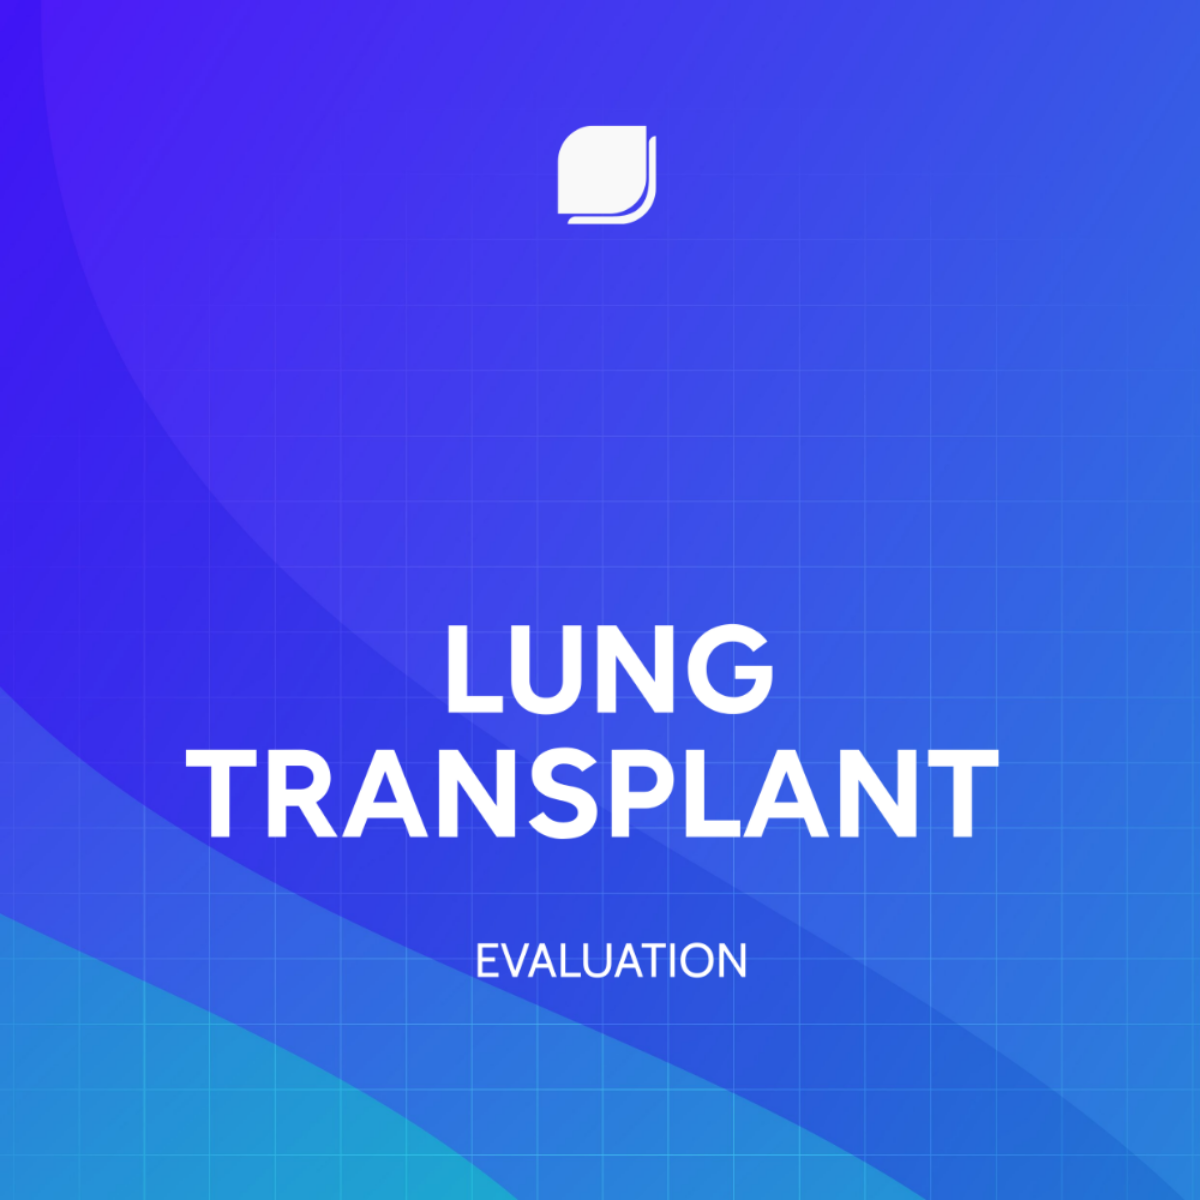 Lung Transplant Evaluation Template